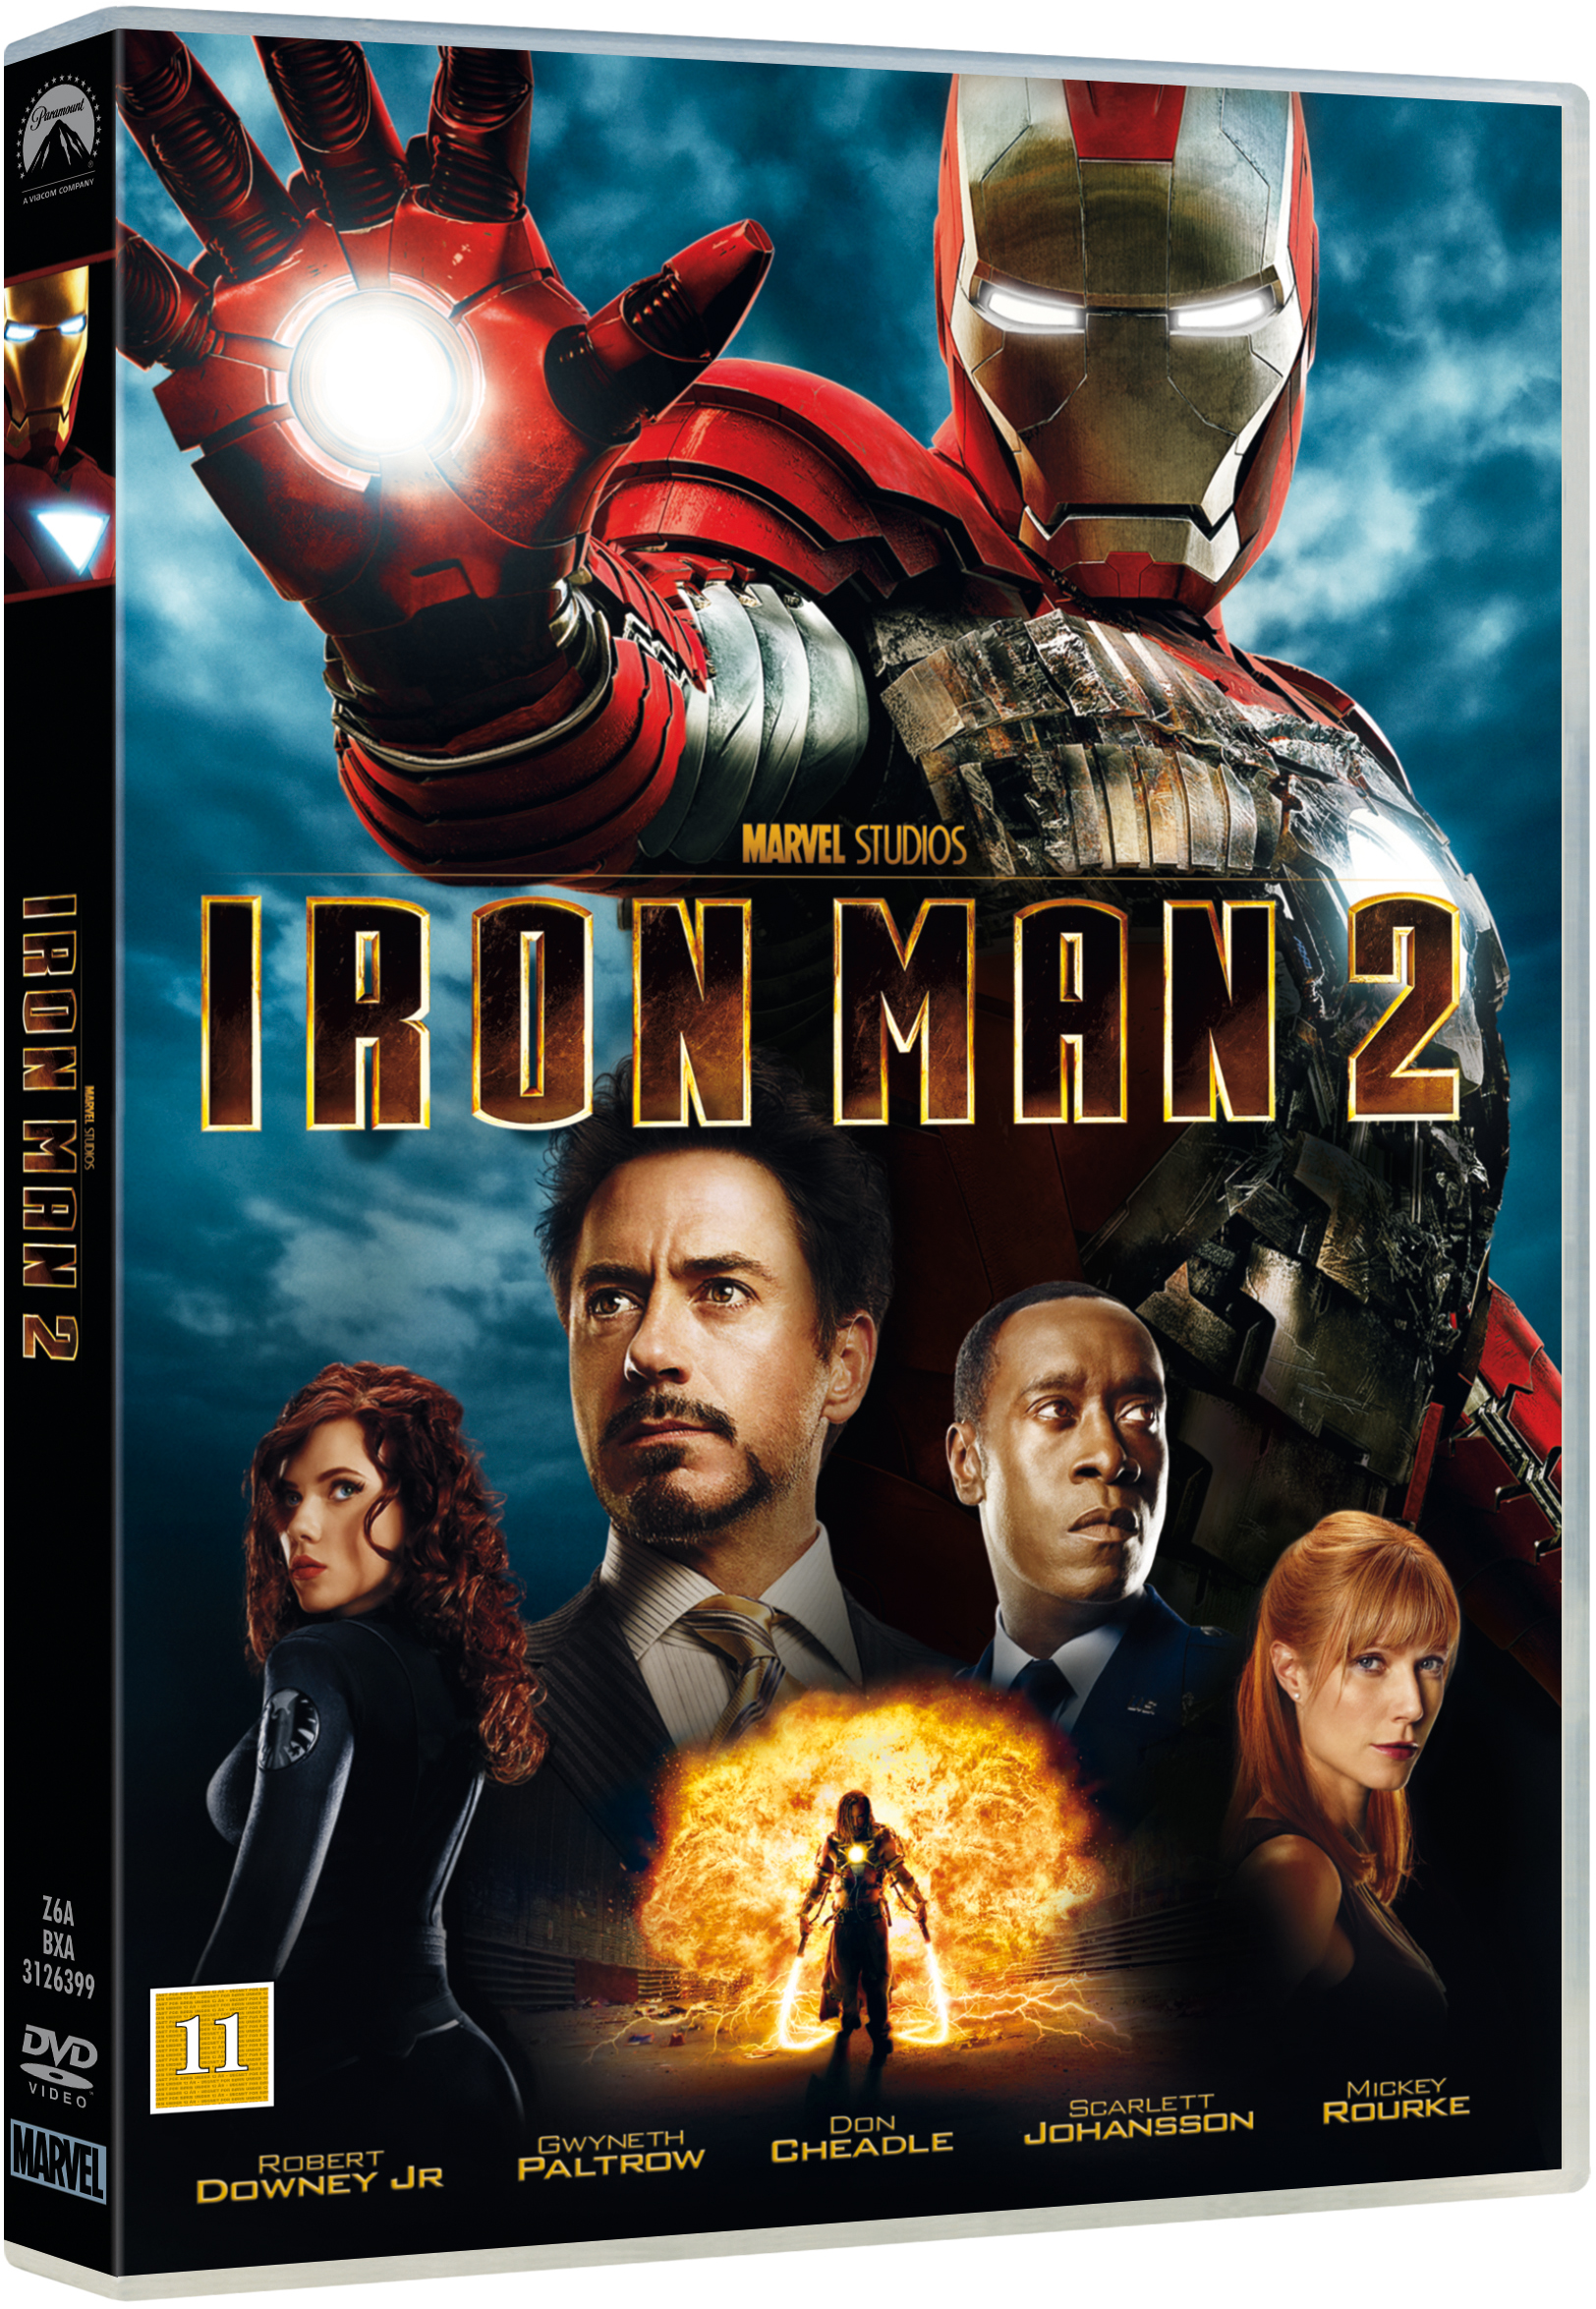 download iron man 2 movie for psp